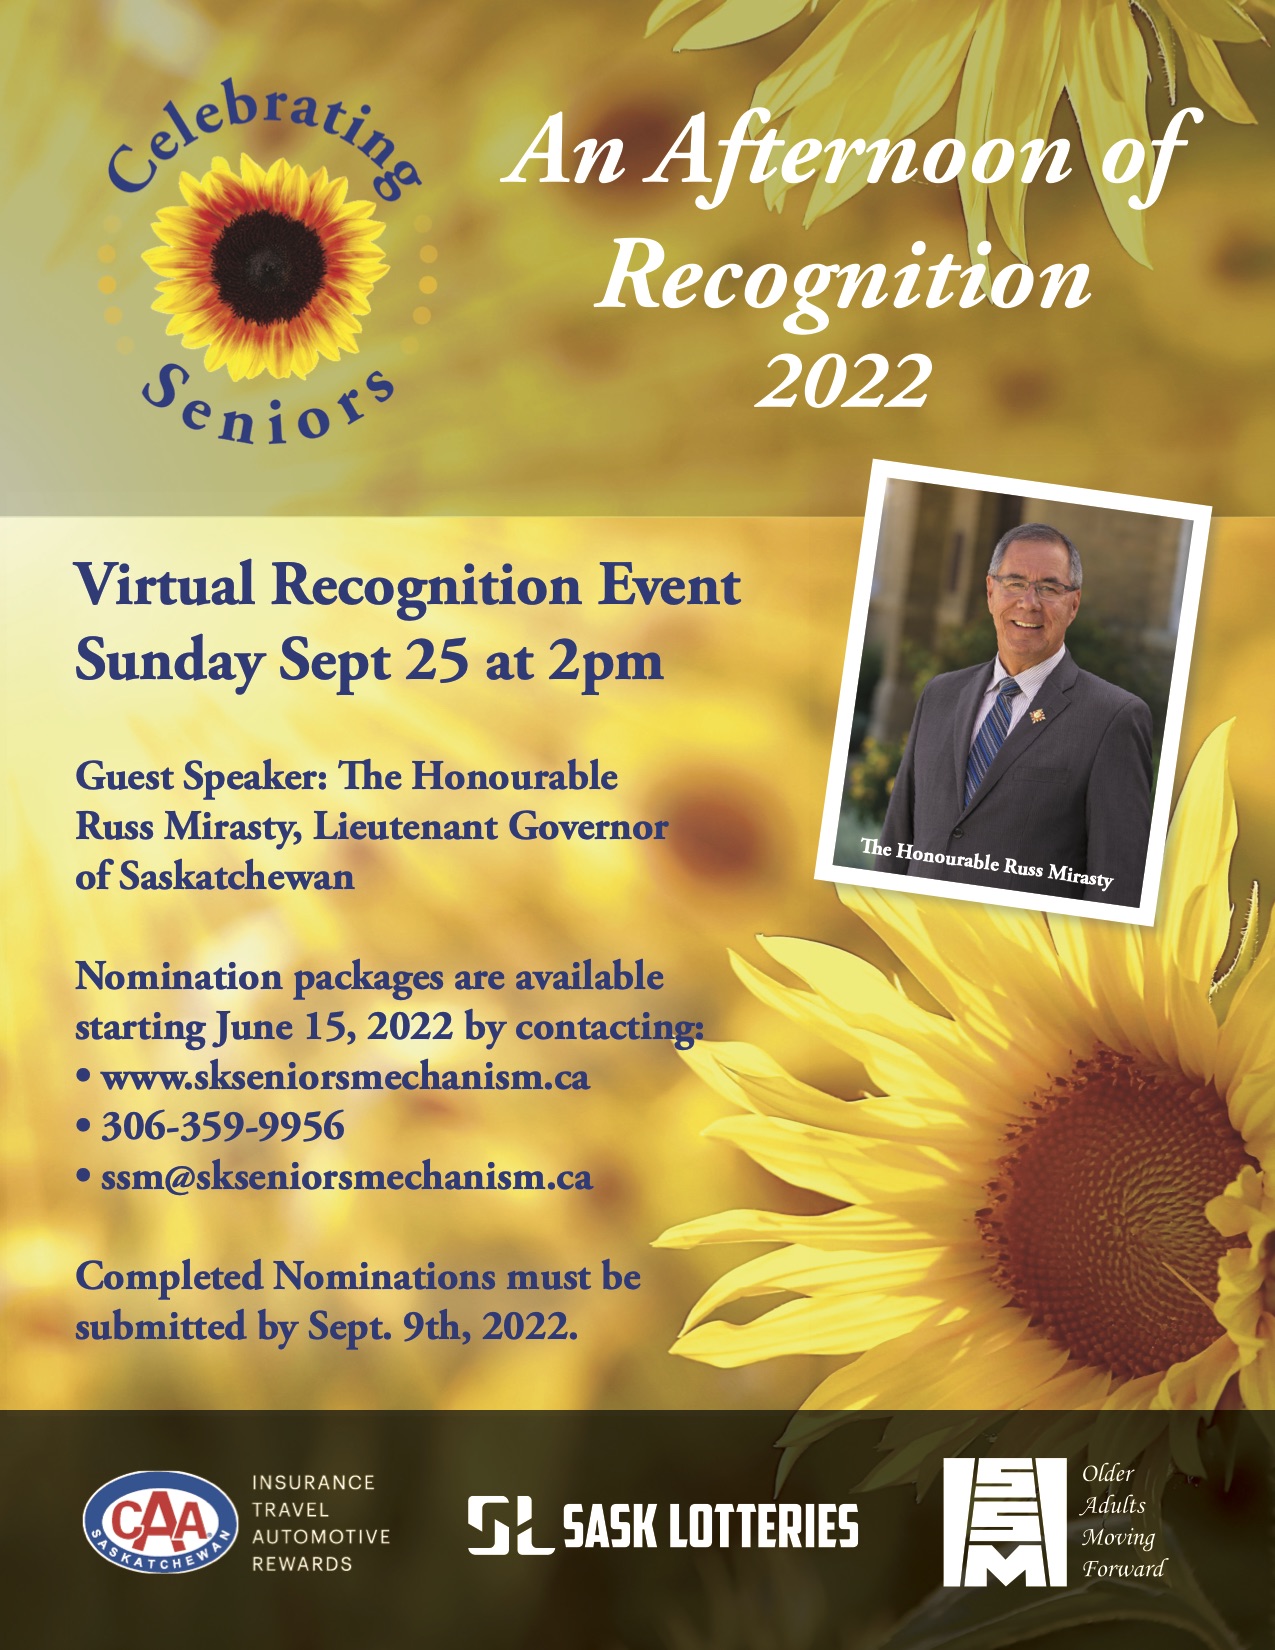 Celebrating Seniors 2022 poster. Background of sunflowers, overlay of photo of Lieutenant Governor, the Honourable Russ Mirasty, and information about the Celebrating Seniors Afternoon of Recognition event.